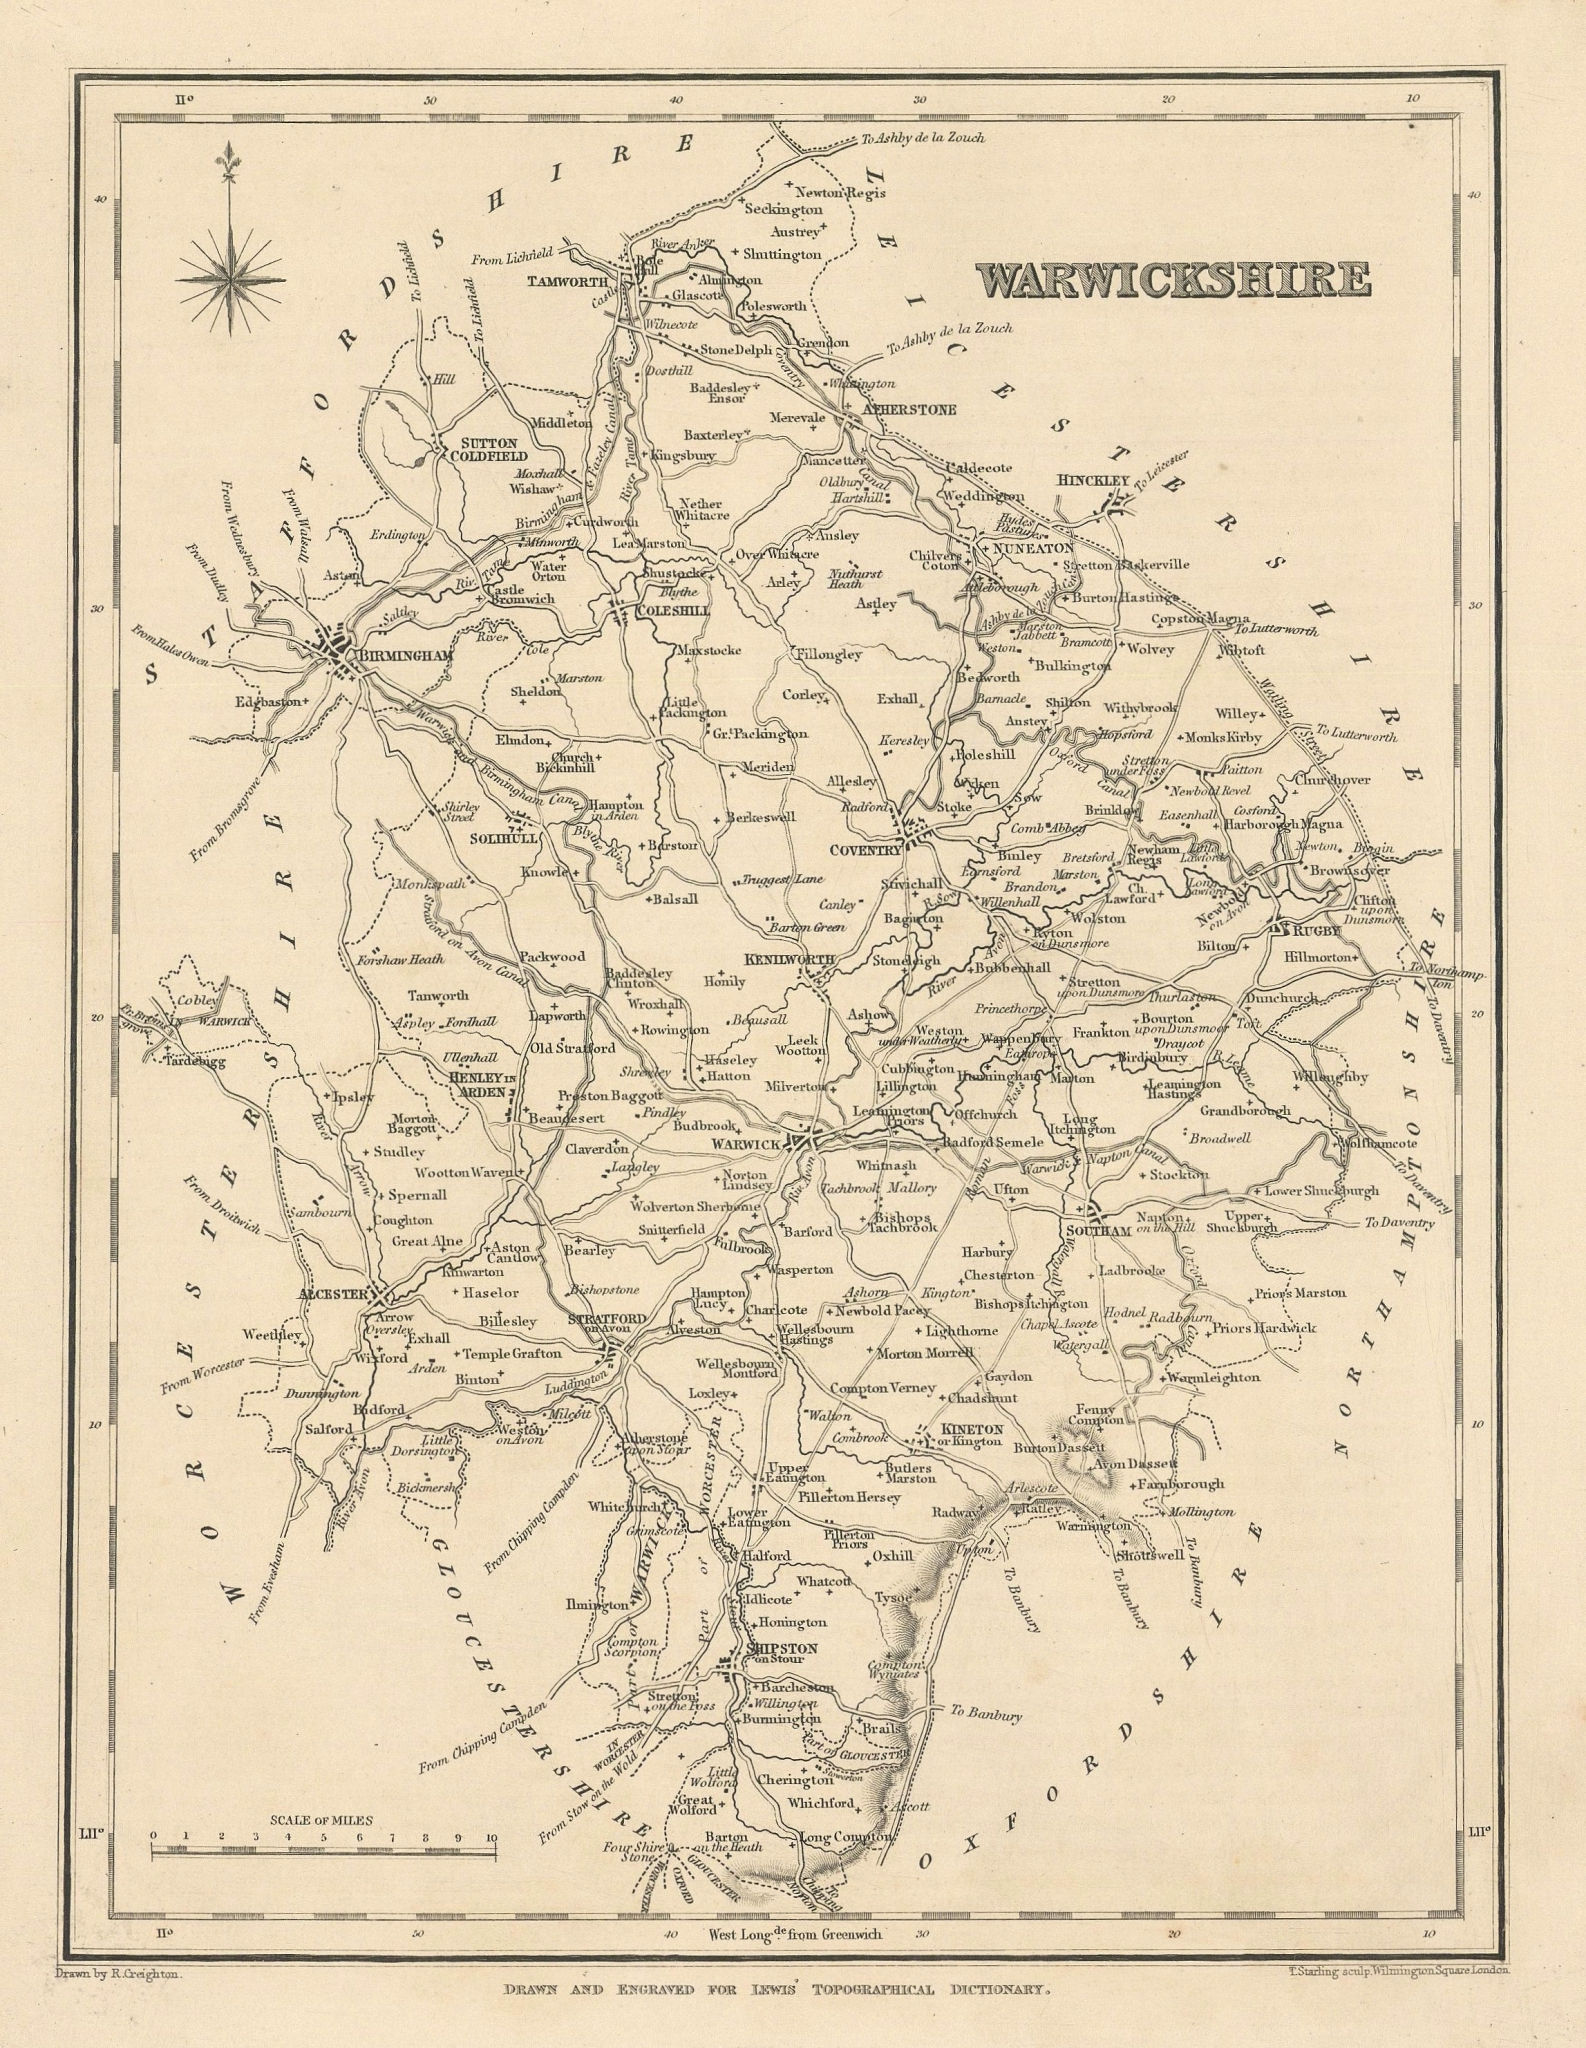 Associate Product Antique county map of WARWICKSHIRE by Starling & Creighton for Lewis c1840